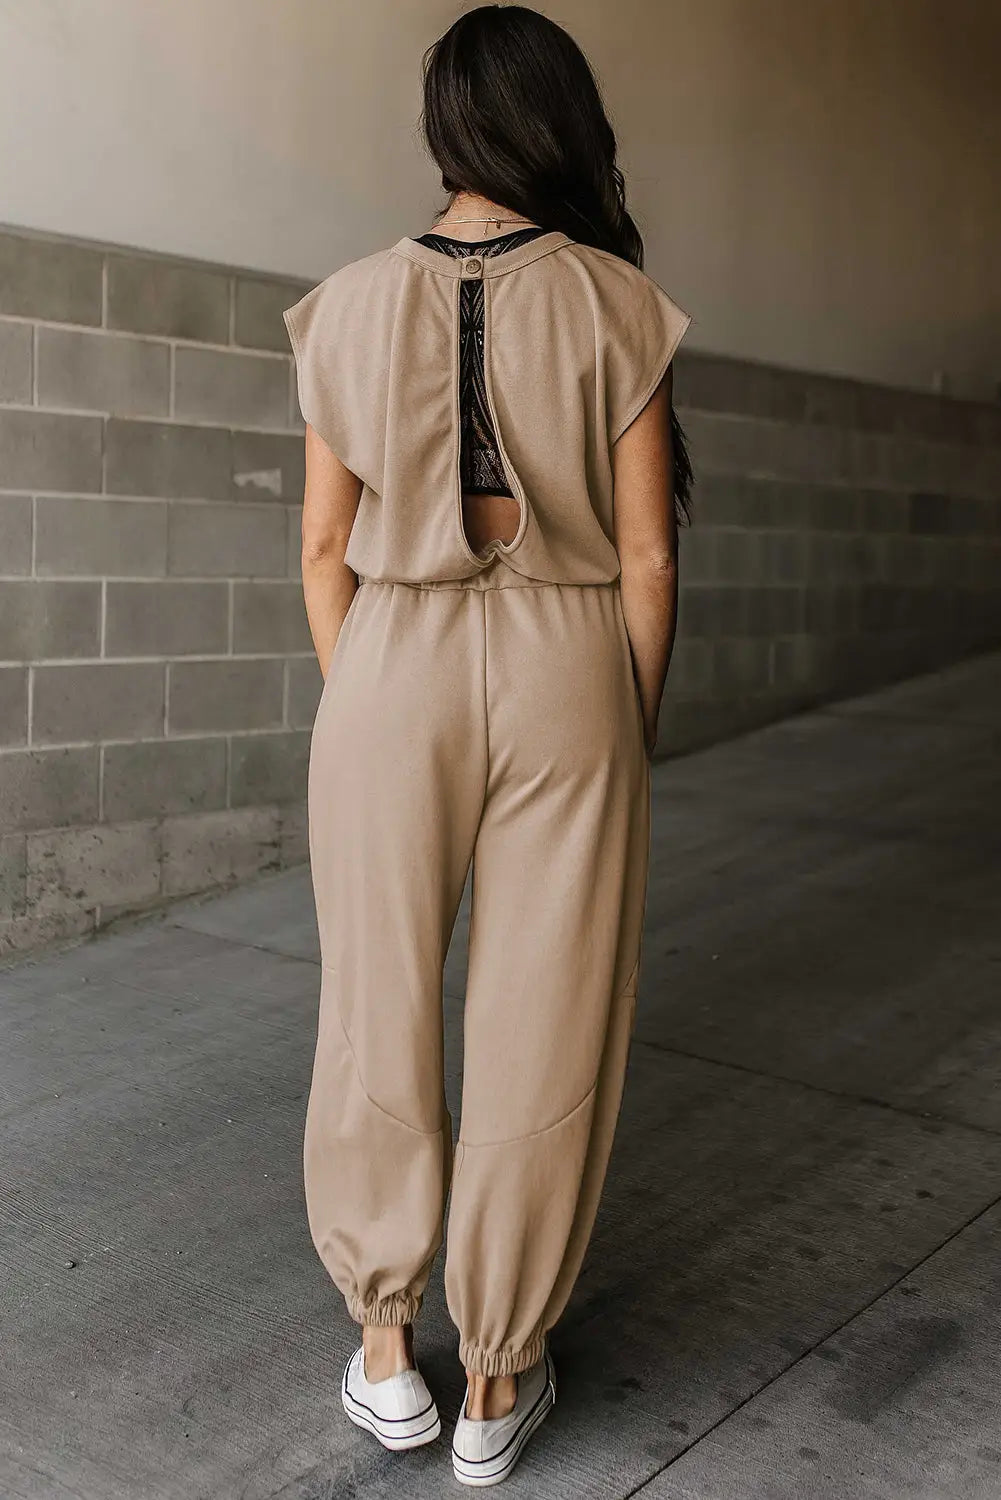 Light french beige cap sleeve open back drawstring jogger jumpsuit - jumpsuits & rompers